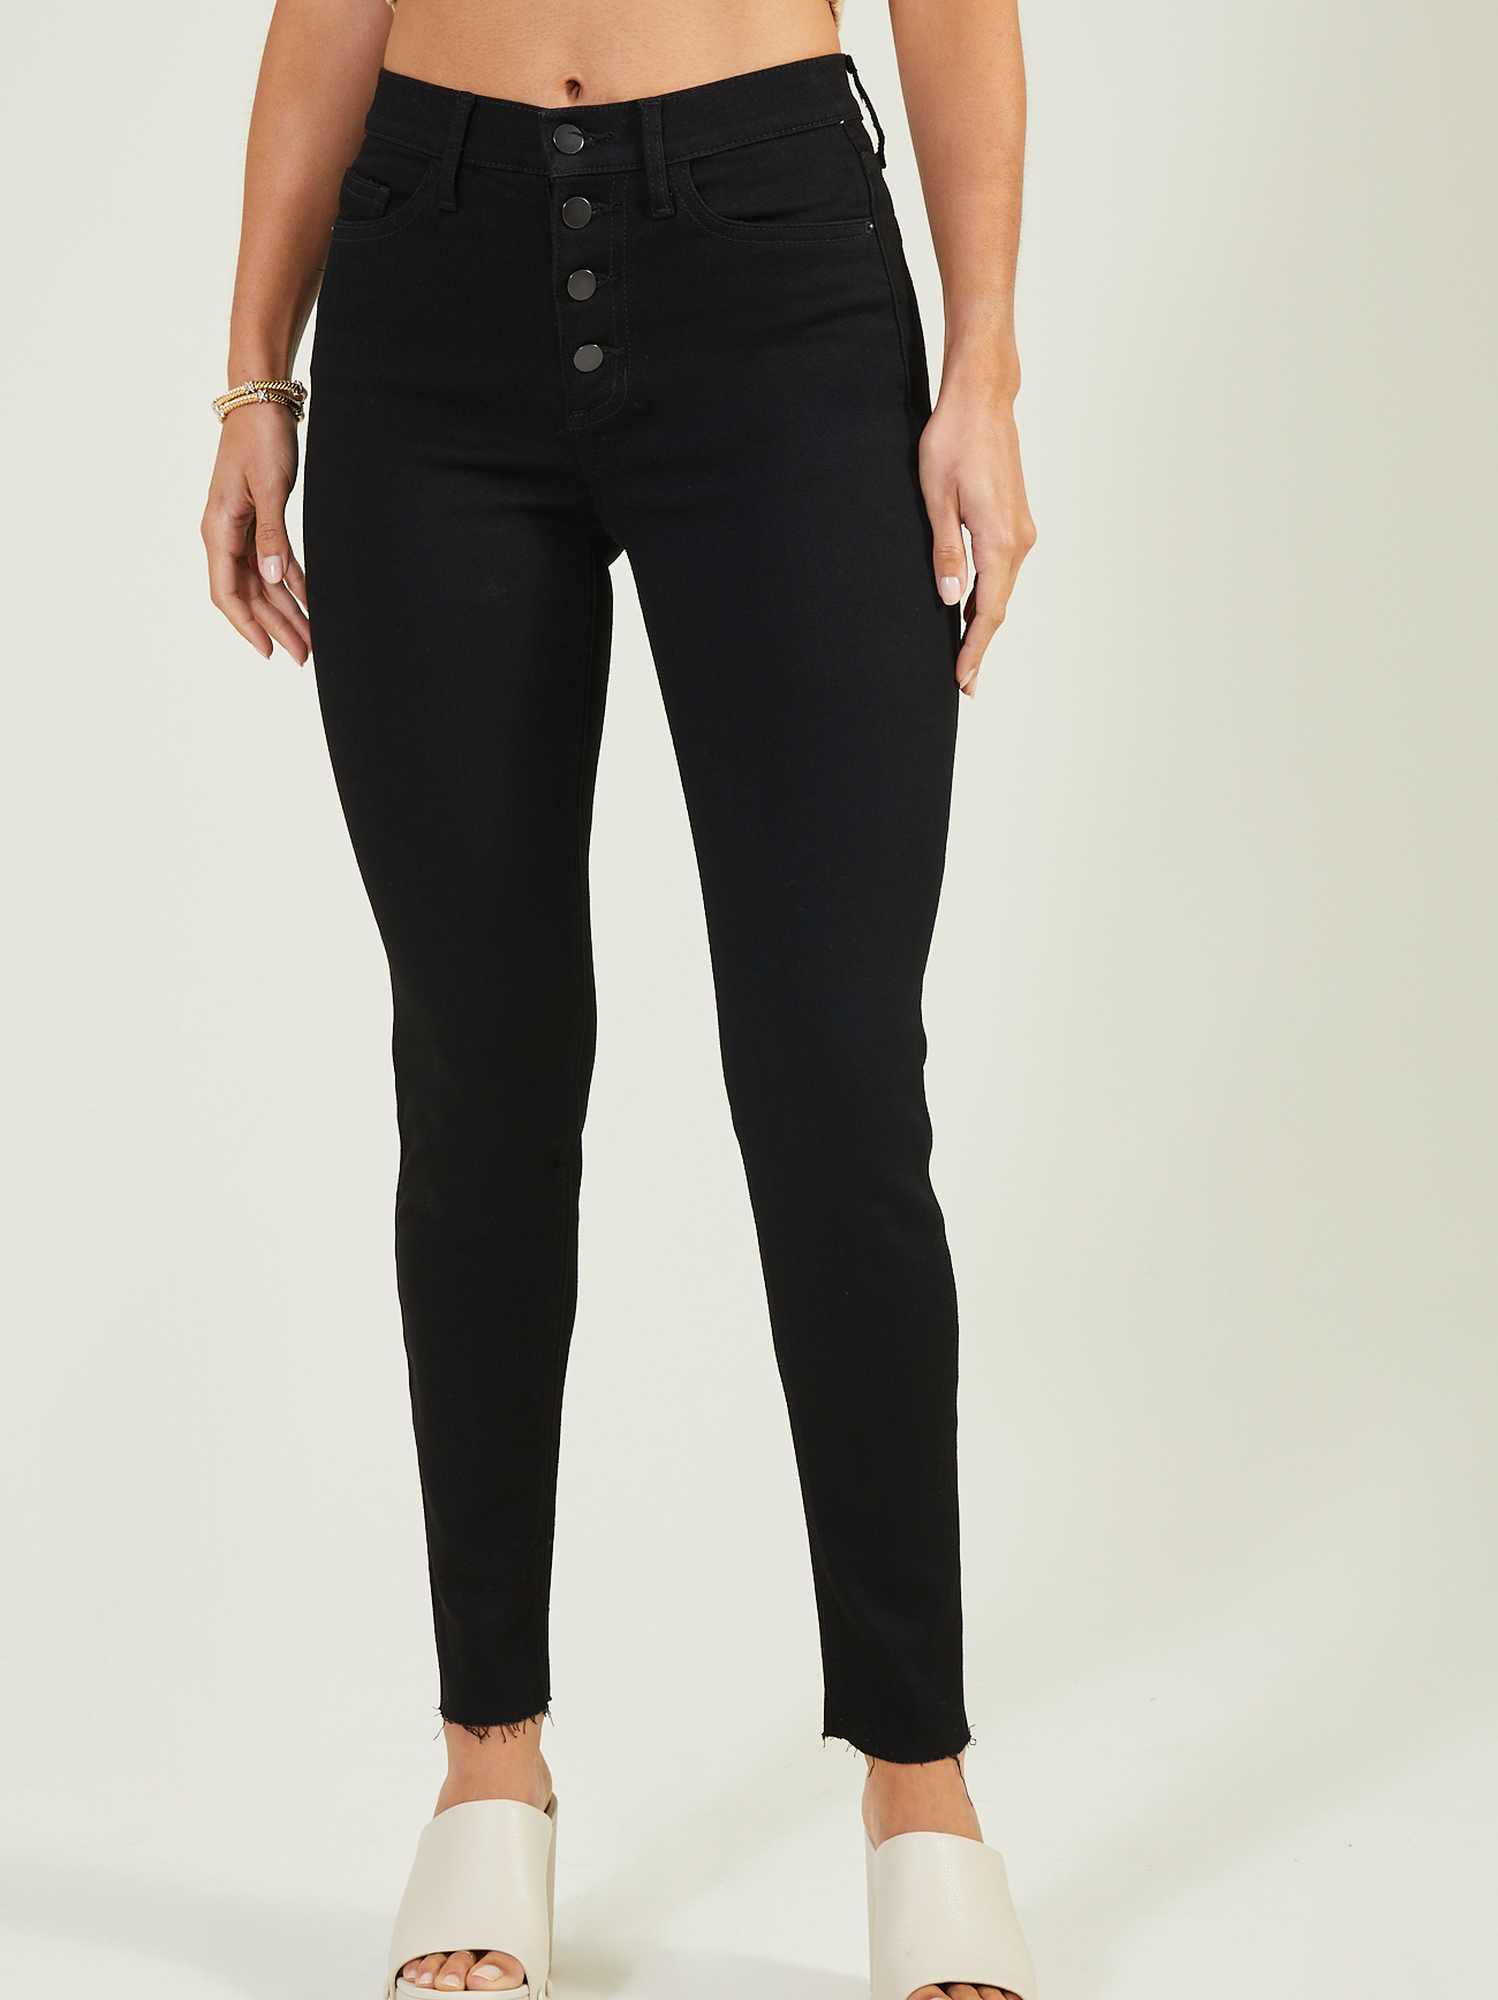 No complicado popurrí tos Katy High Rise Skinny Jeans in Jet Black | A;tar'd State